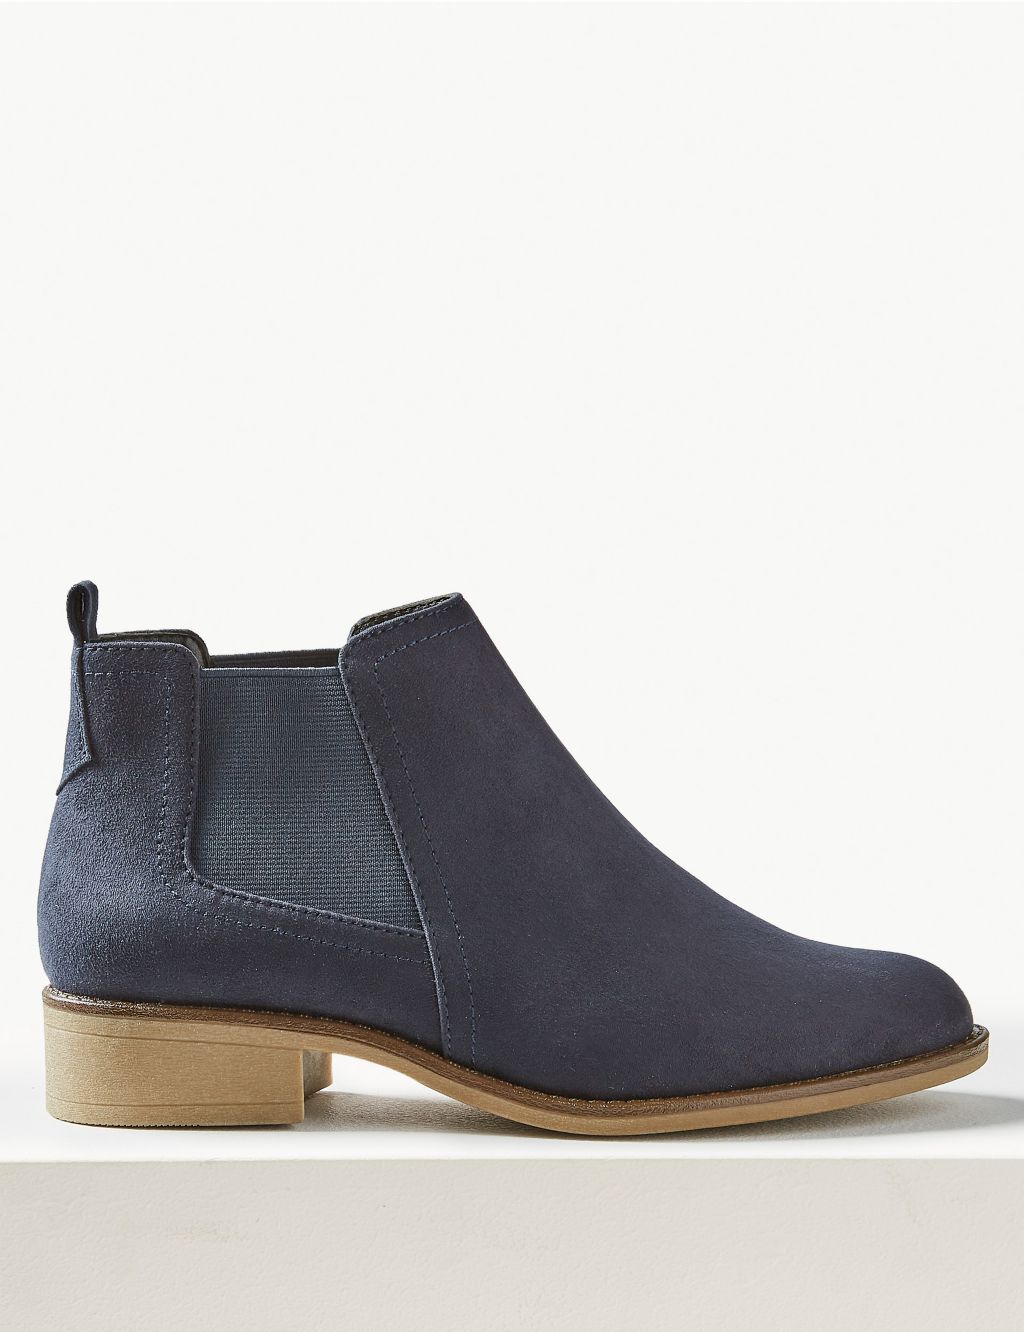 Chelsea Block Heel Ankle Boots | M&S Collection | M&S